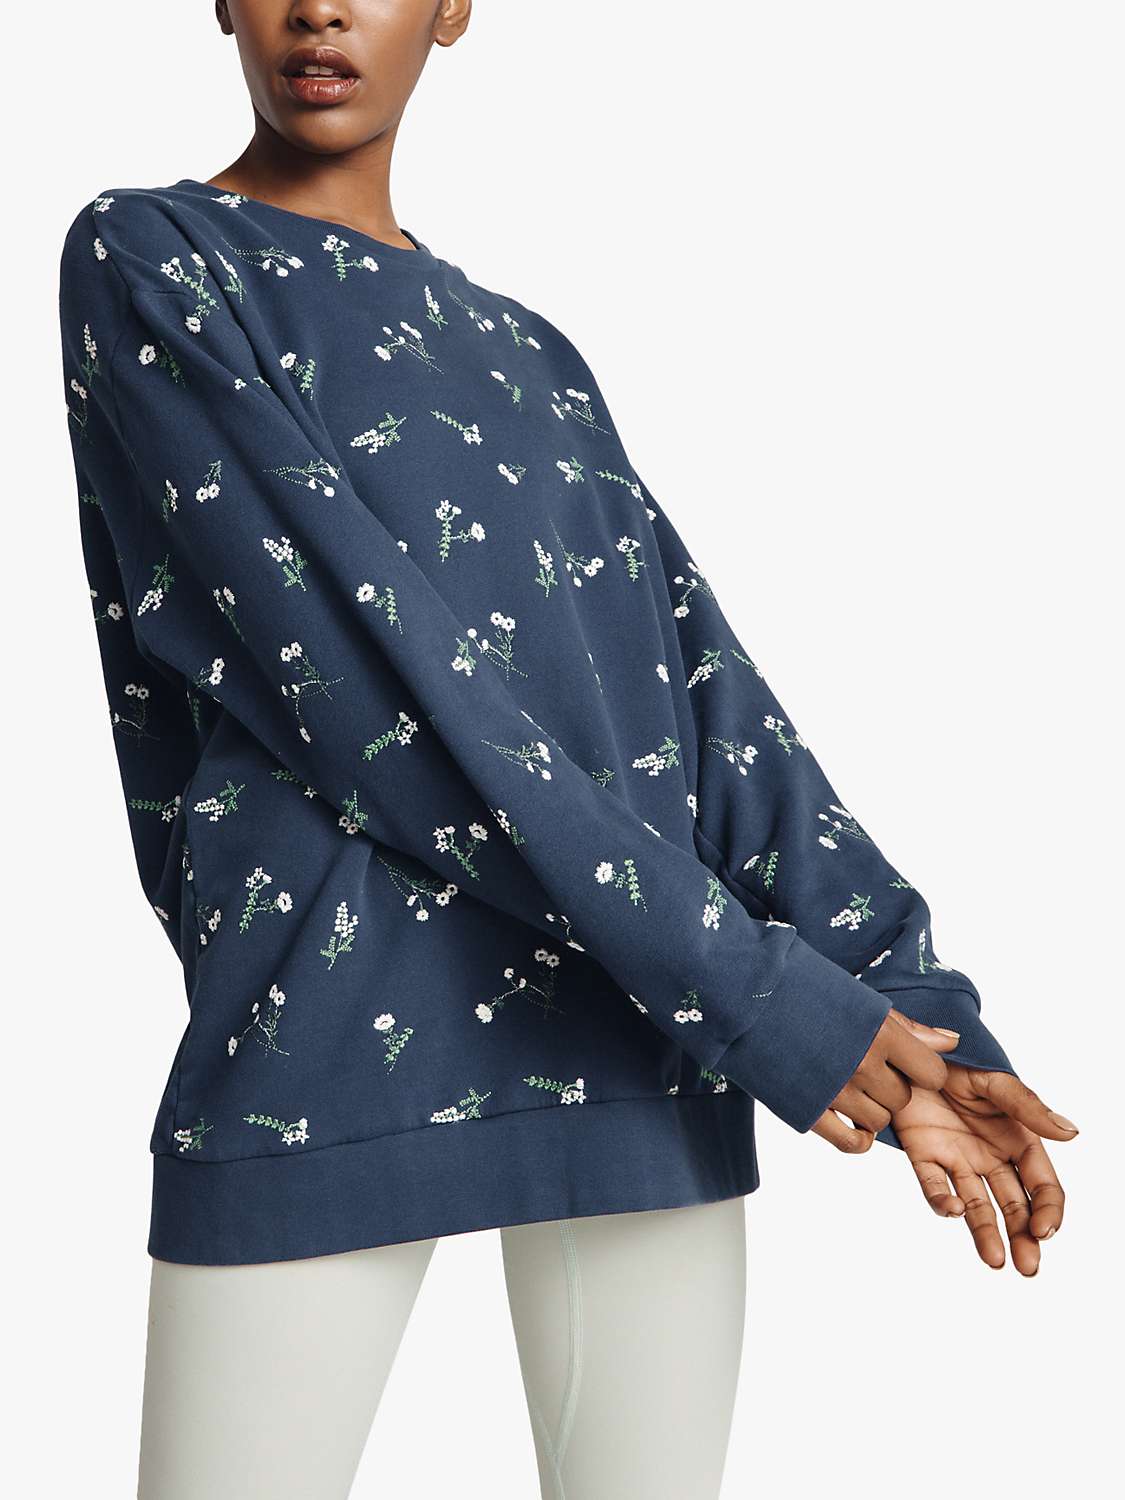 Buy Ghost Organic Cotton Floral Embroidered Loose Fit Sweatshirt Online at johnlewis.com